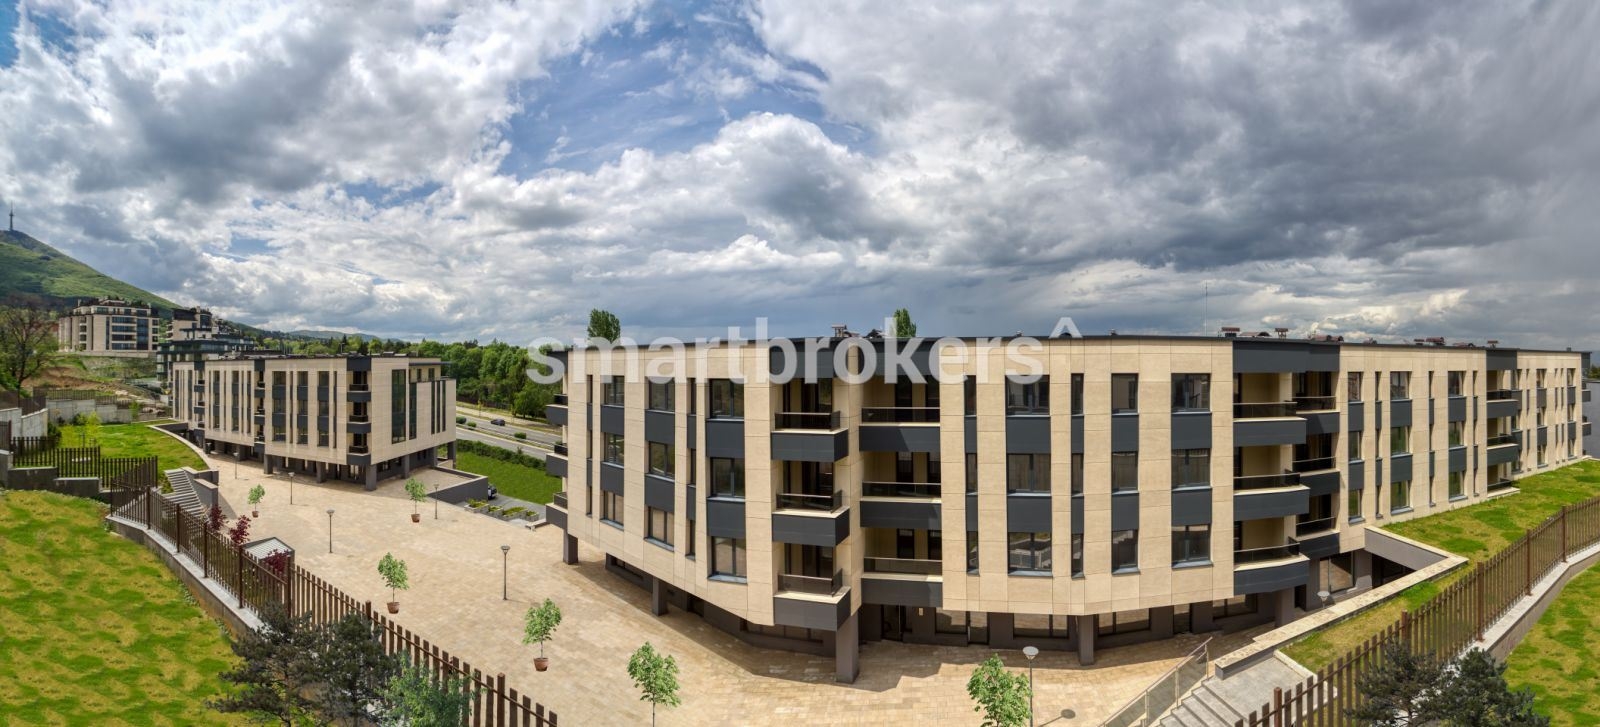 One-bedroom apartment in a modern gated complex in Boyana